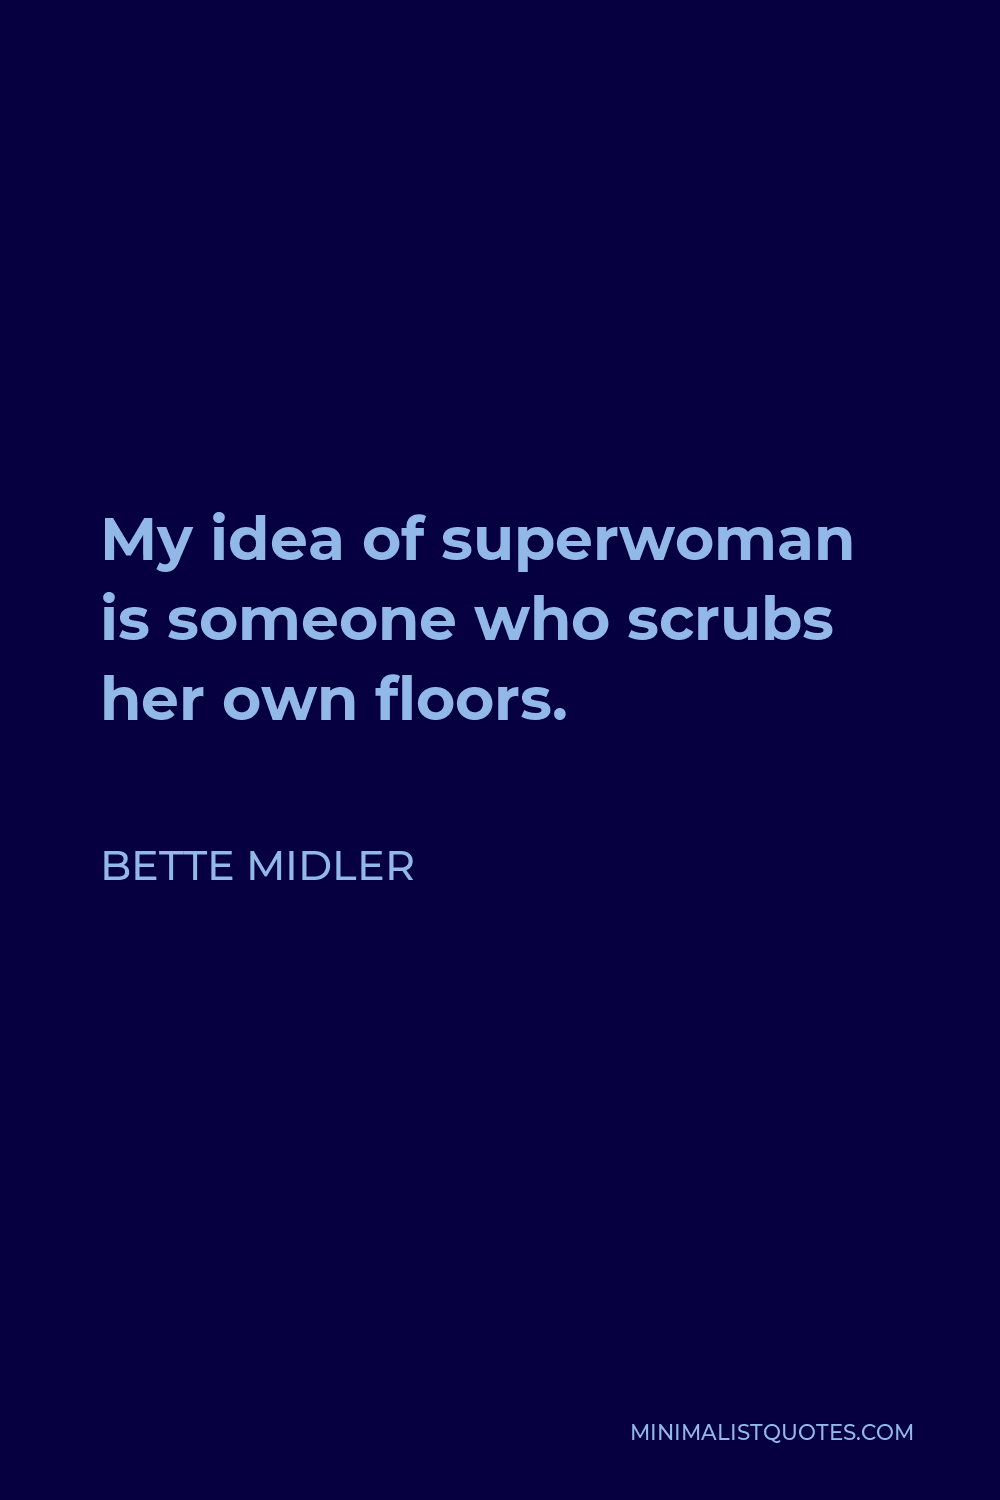 Bette Midler Quote - My idea of superwoman is someone who scrubs her own floors.